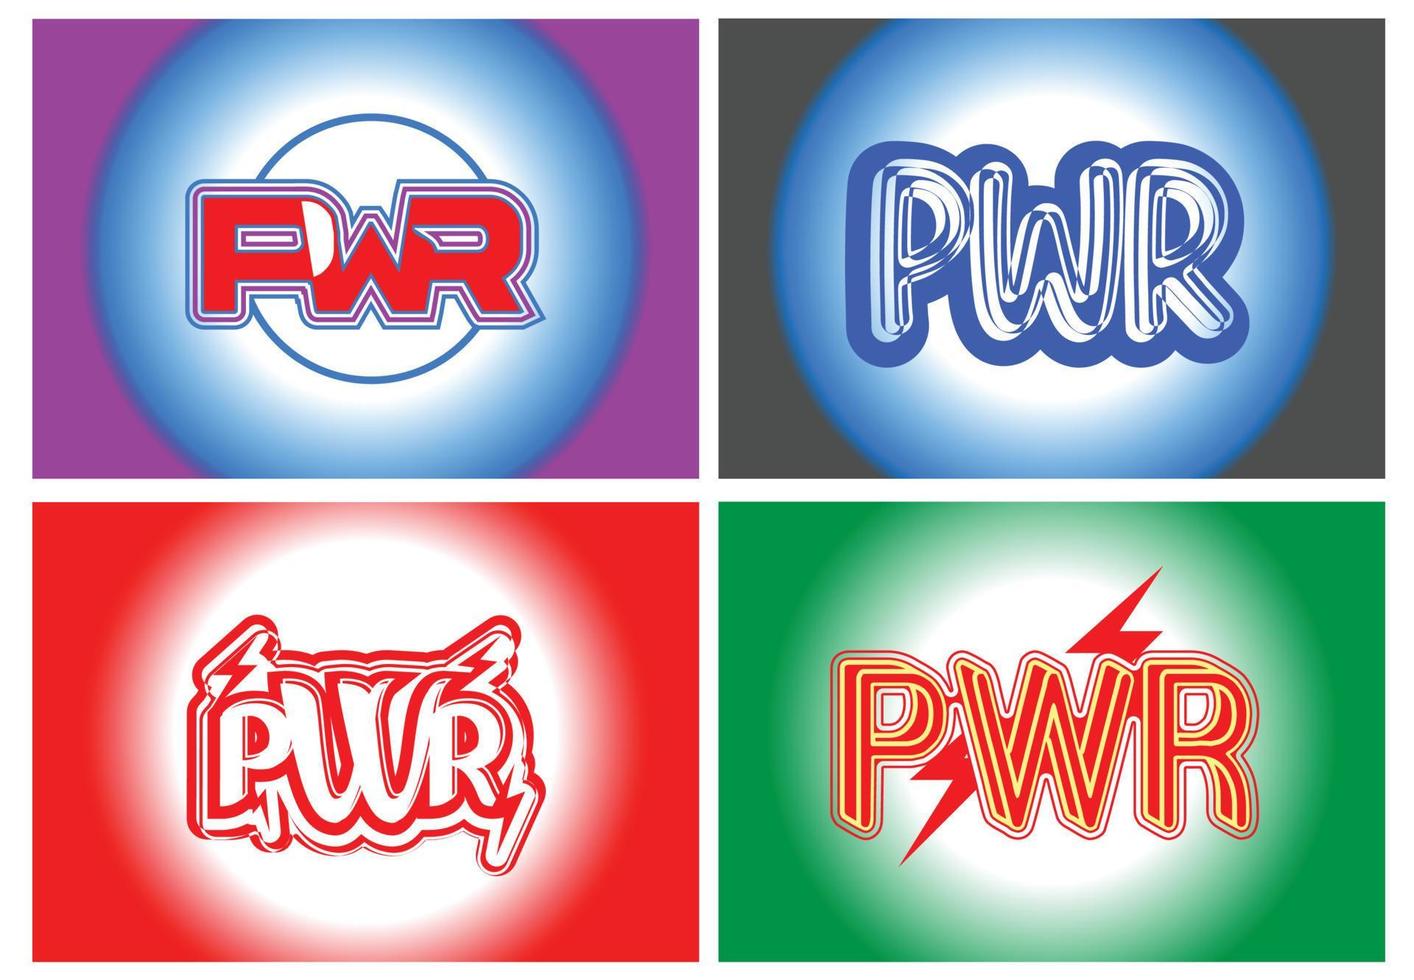 PWR letter logo and icon design template sets vector